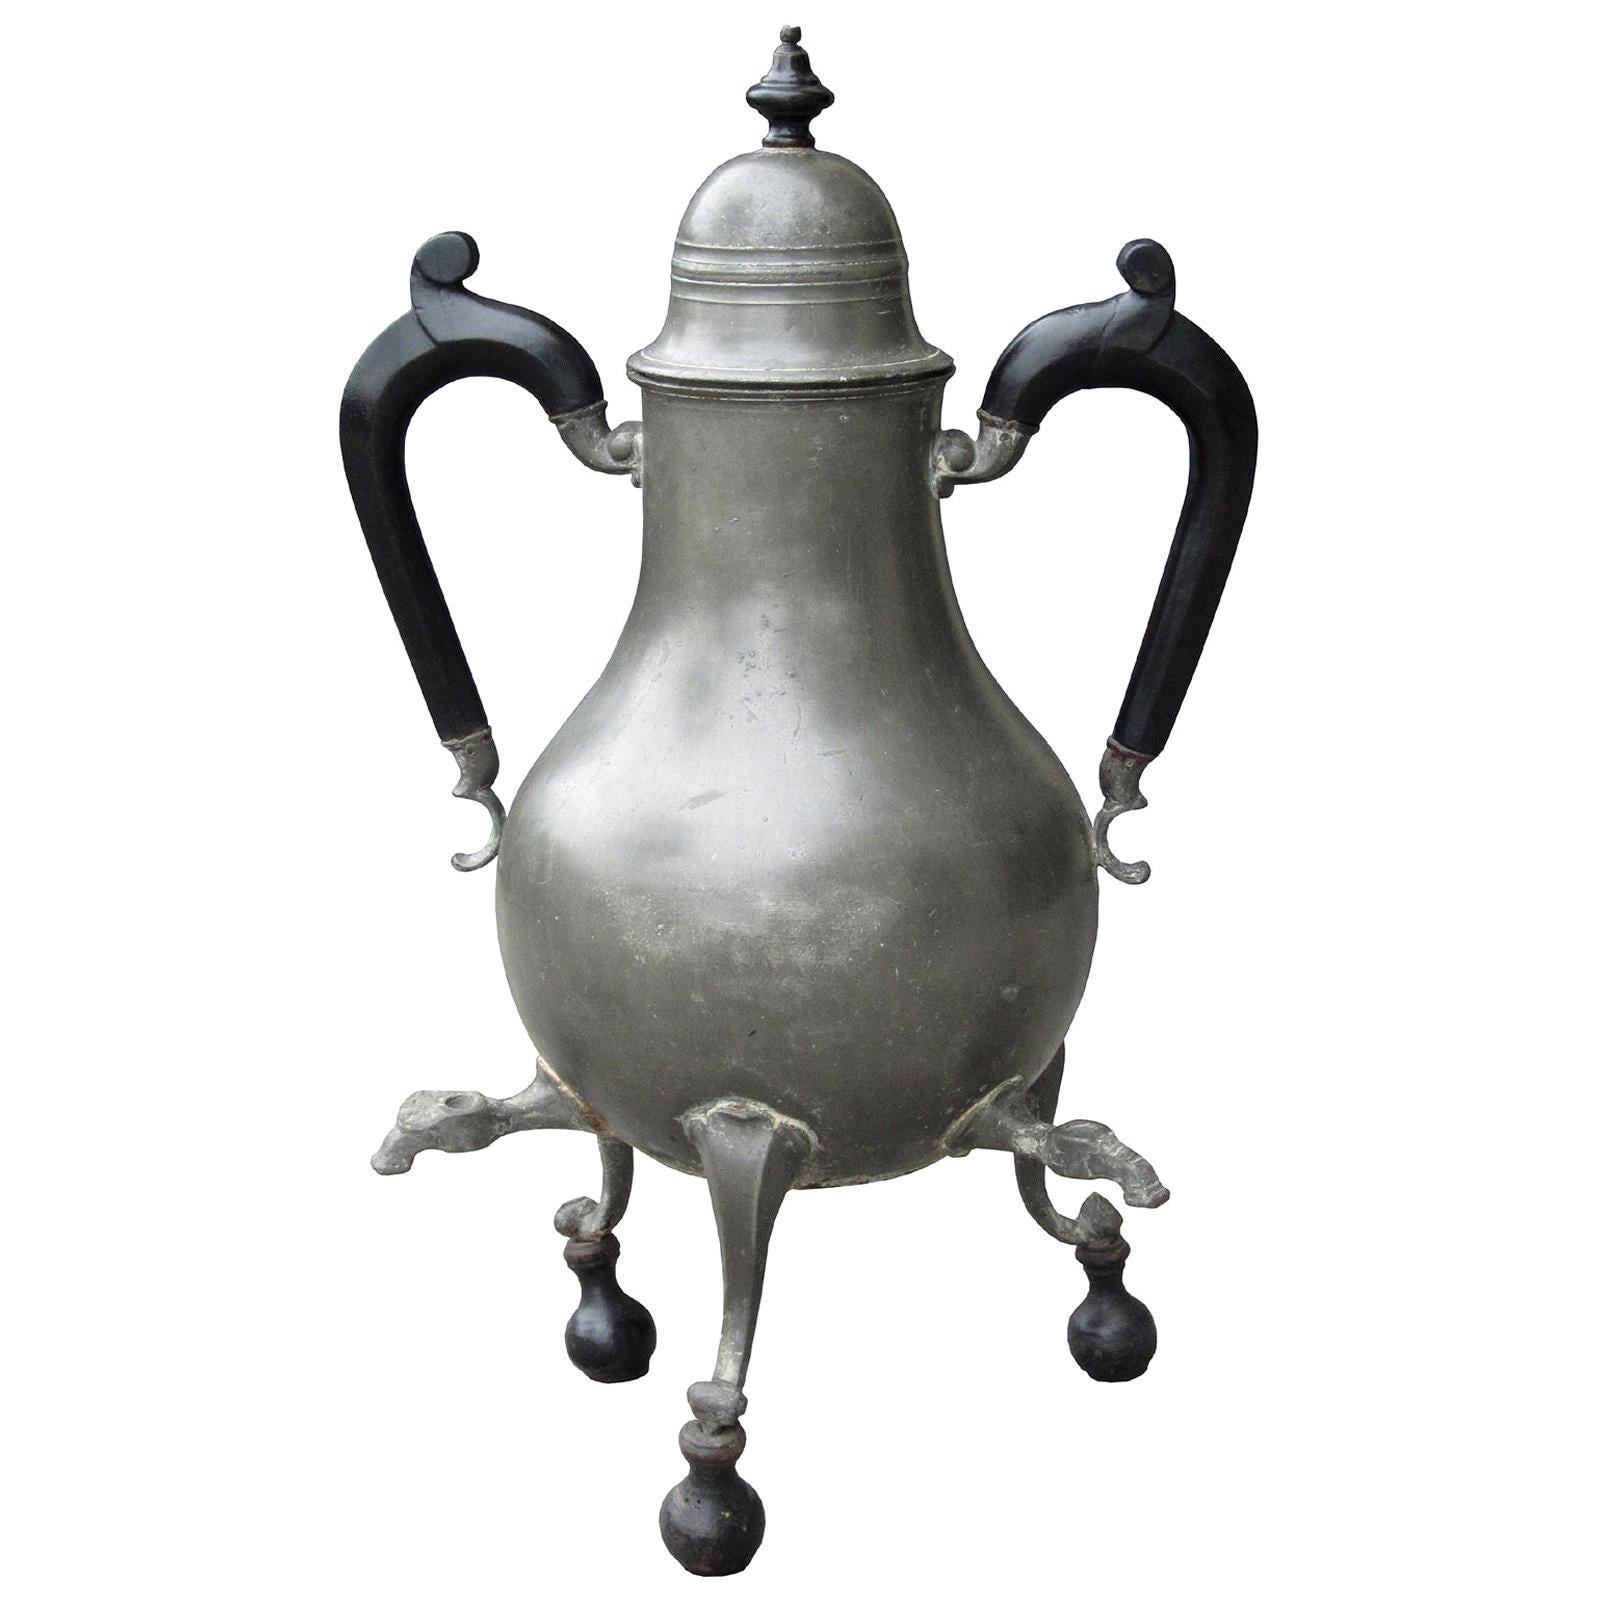 Early 18th-19th Century Pewter Lidded Hot Water Urn, Three Spouts, Wood Handles For Sale